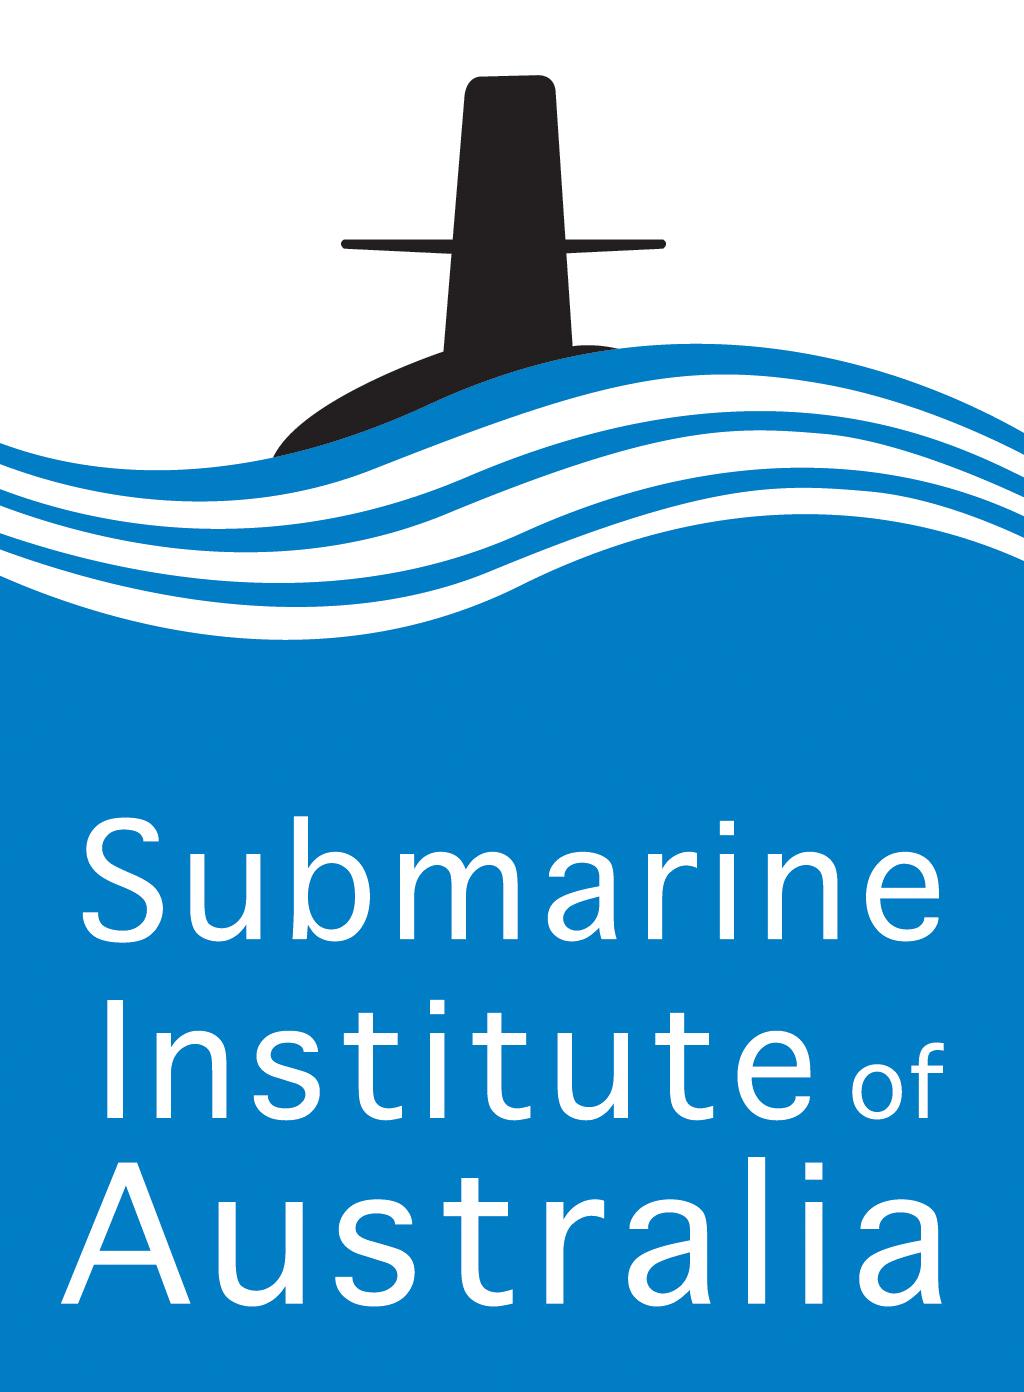 Report 07/REP/2150 A BRIEF ON THE ISSUES ARISING FROM CONSIDERATION OF THE REQUIREMENTS FOR A FUTURE SUBMARINE CAPABILITY FOR AUSTRALIA The information contained in this document shall remain the